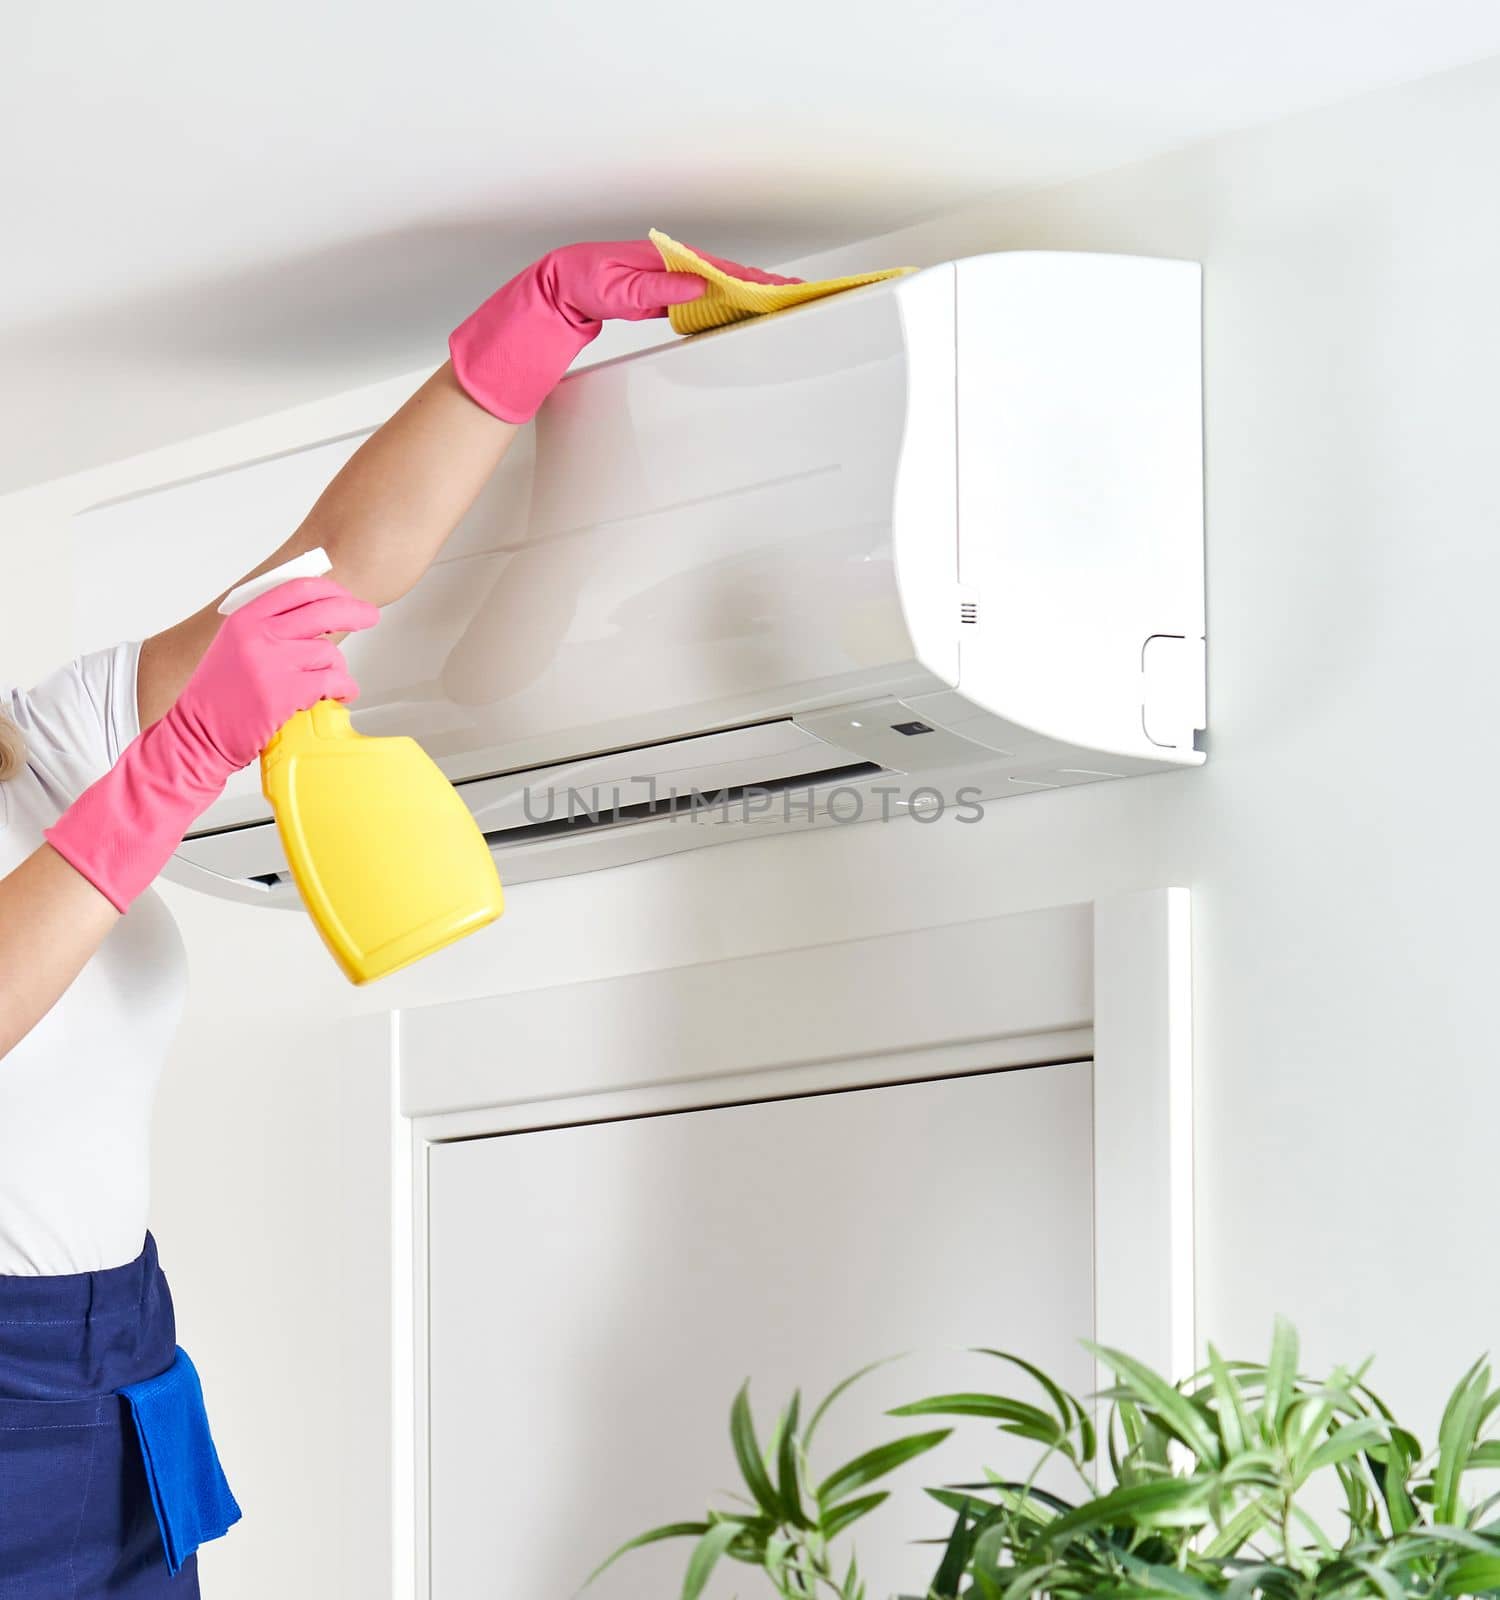 Woman cleaning air conditioner with rag. Cleaning service or housewife concept by Mariakray